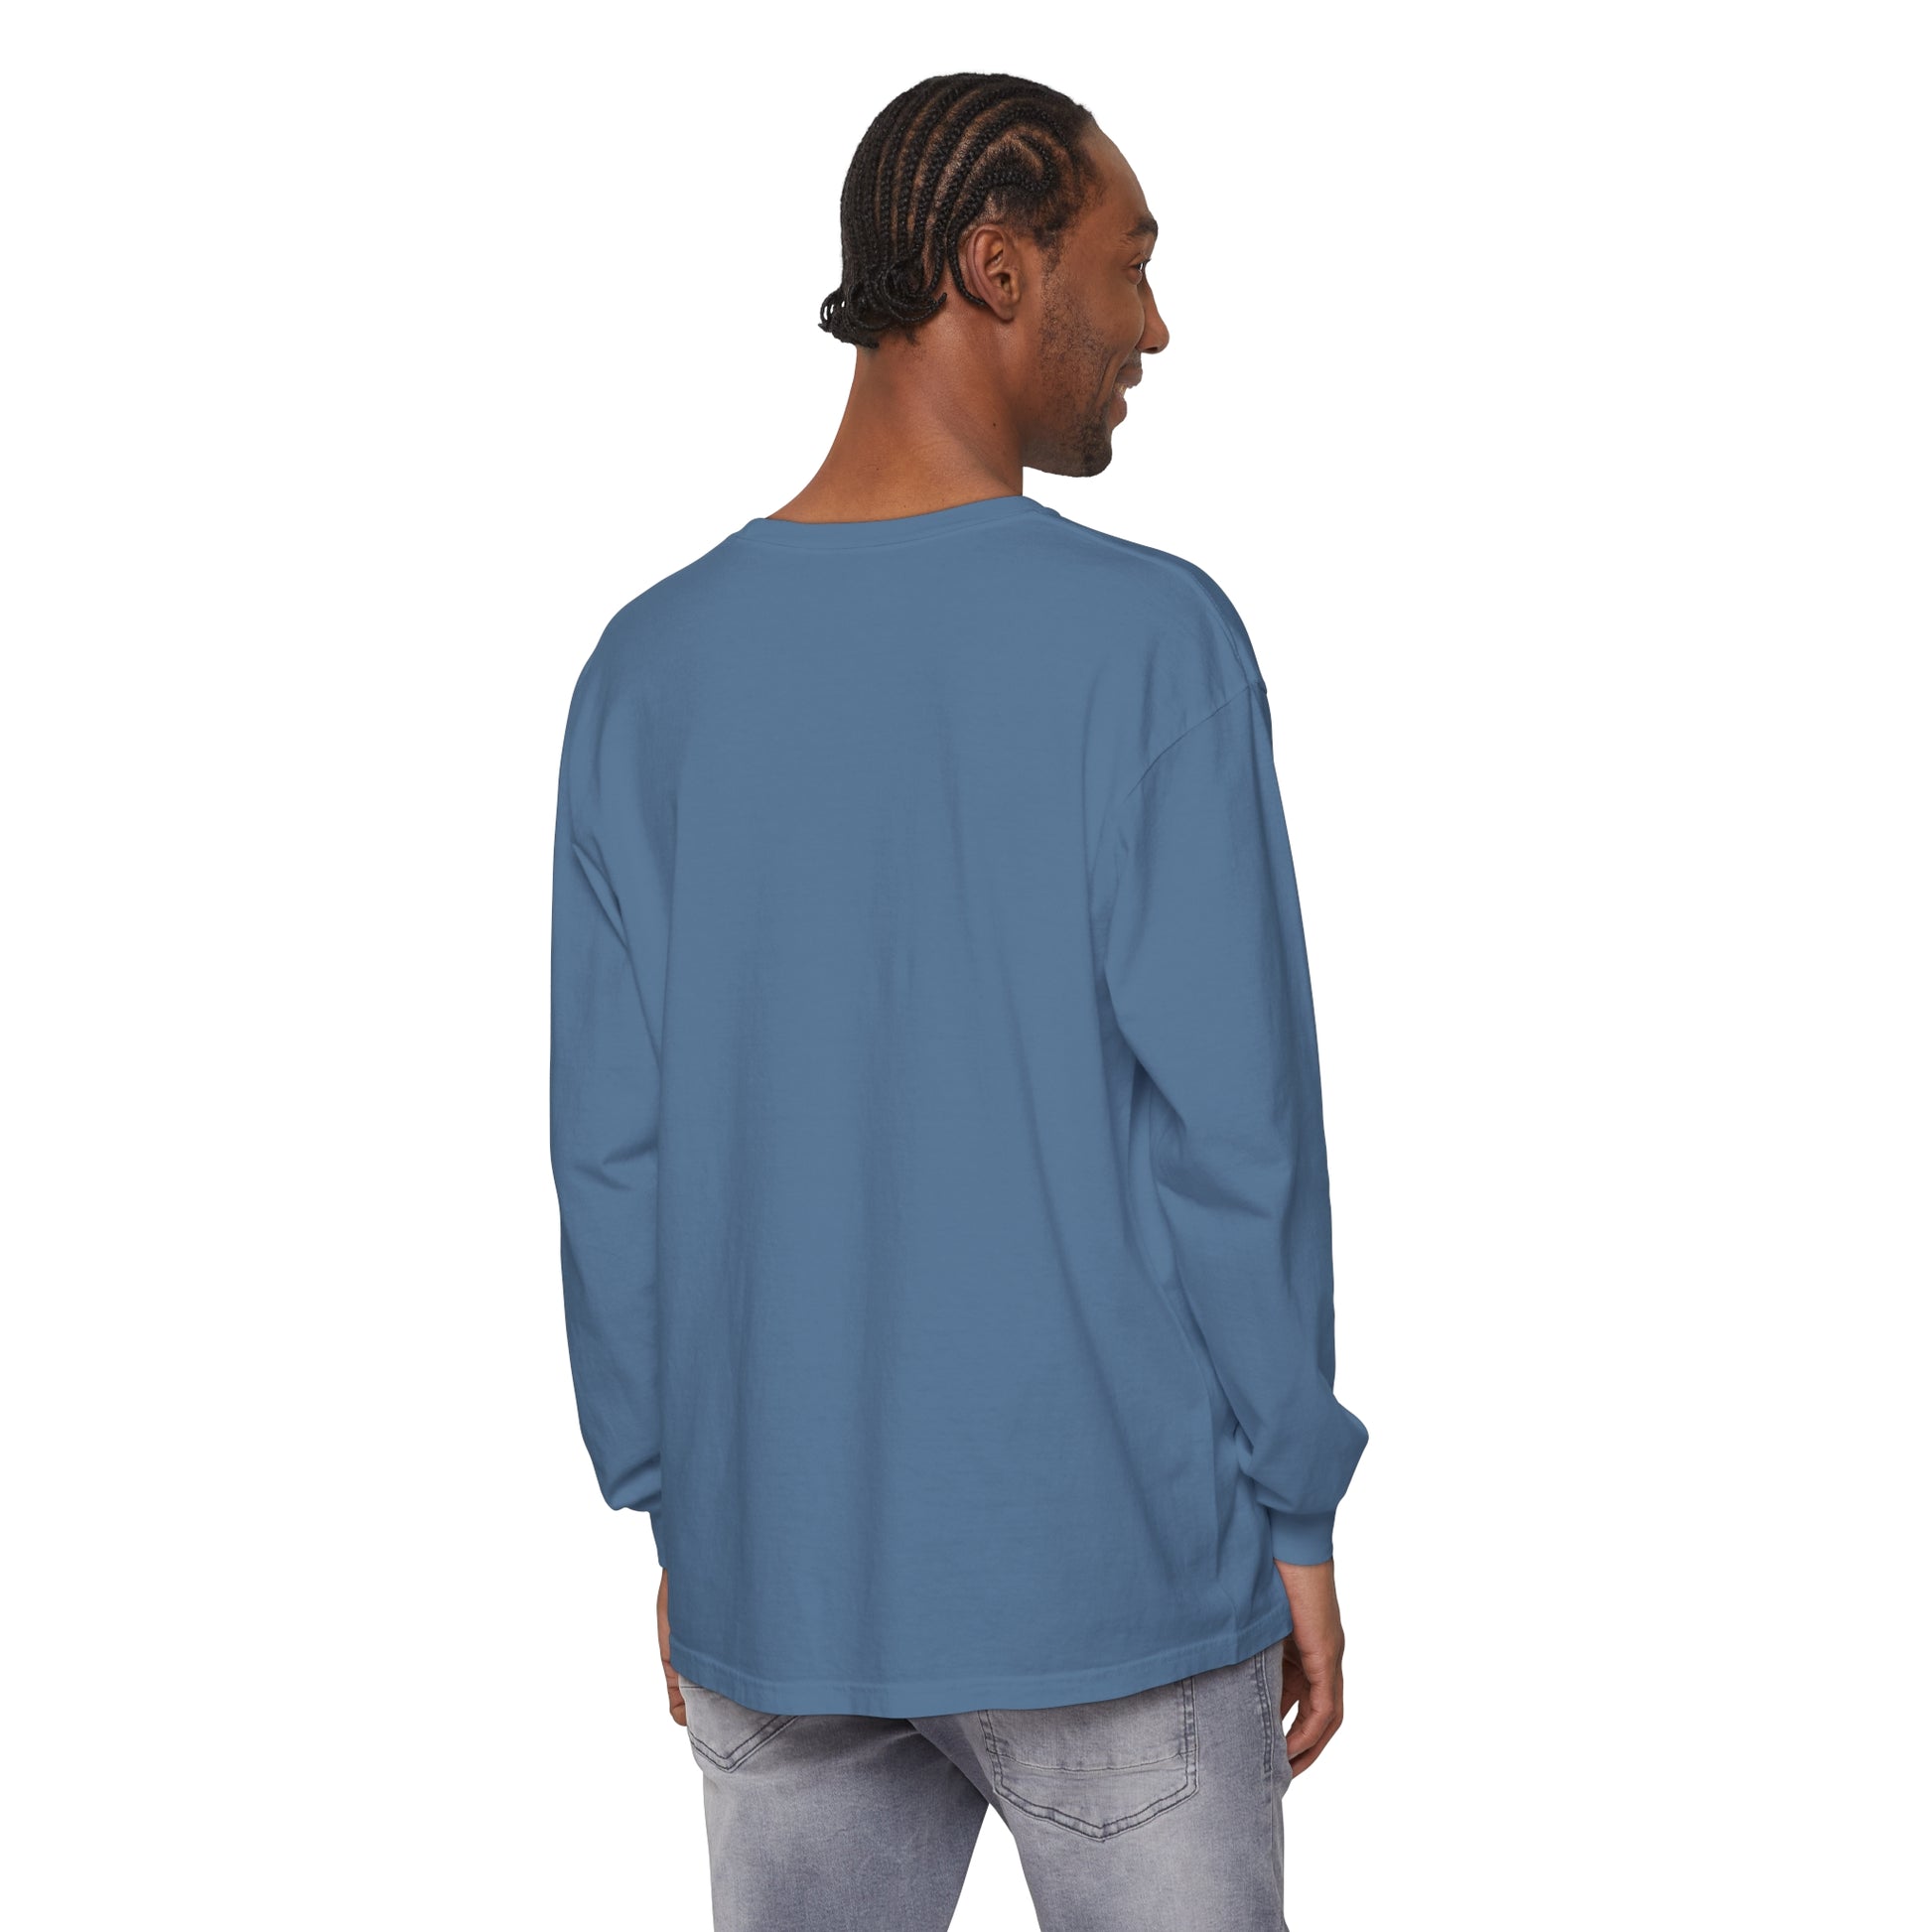 The back view of a man wearing a blue Printify Comfort Colors Unisex Shirt.